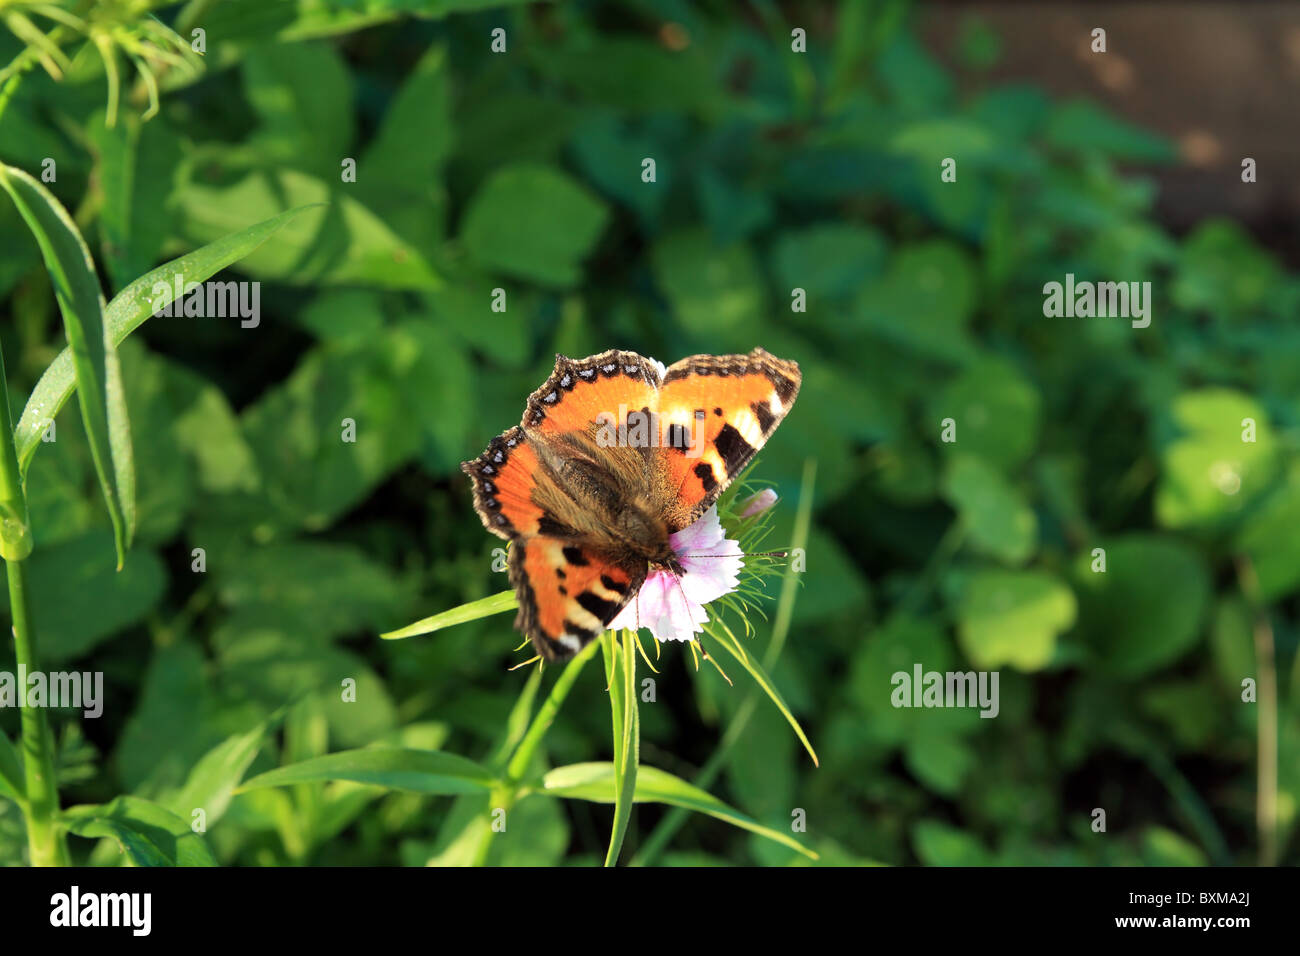 Butterfly on flower Banque D'Images